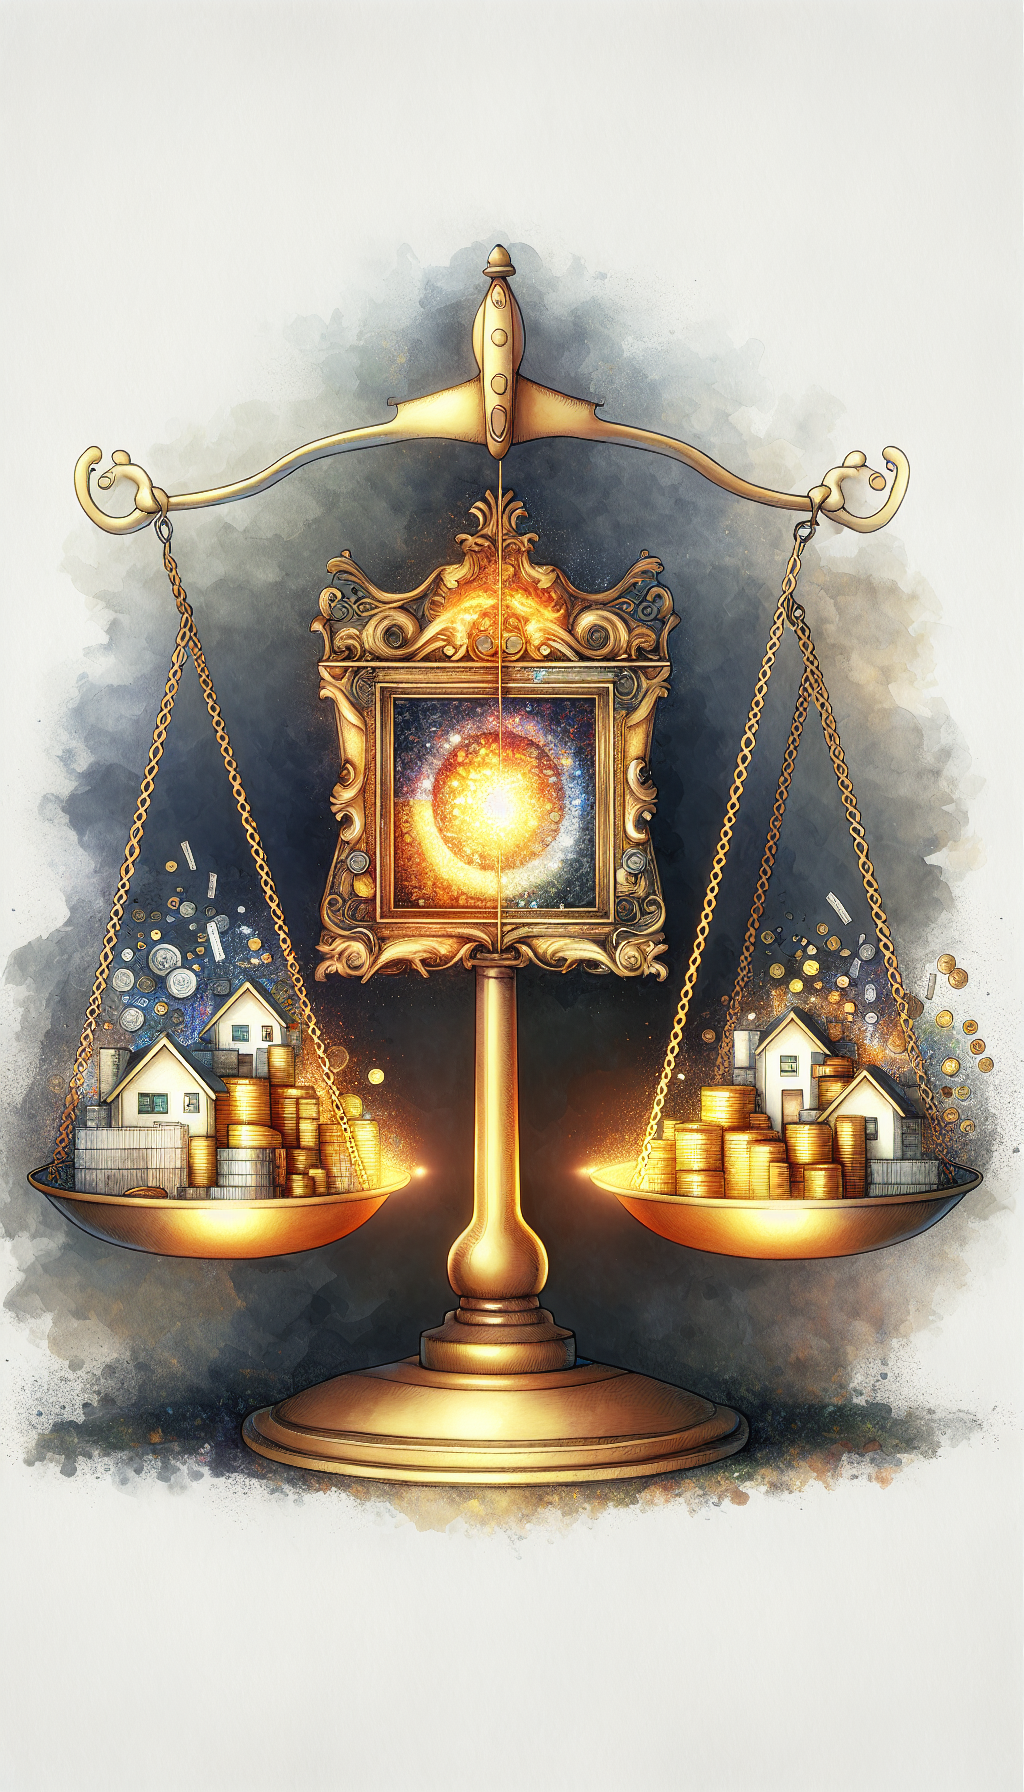 An illustration depicts a whimsical balance scale, with one side displaying a gilded frame showcasing a vibrant, abstract painting (representing art appraisal), while the other side is filled with coins and miniature houses, hinting at factors such as real estate and market trends (influencing cost). Watercolor strokes add an artistic flair, blending the themes of valuation and art.